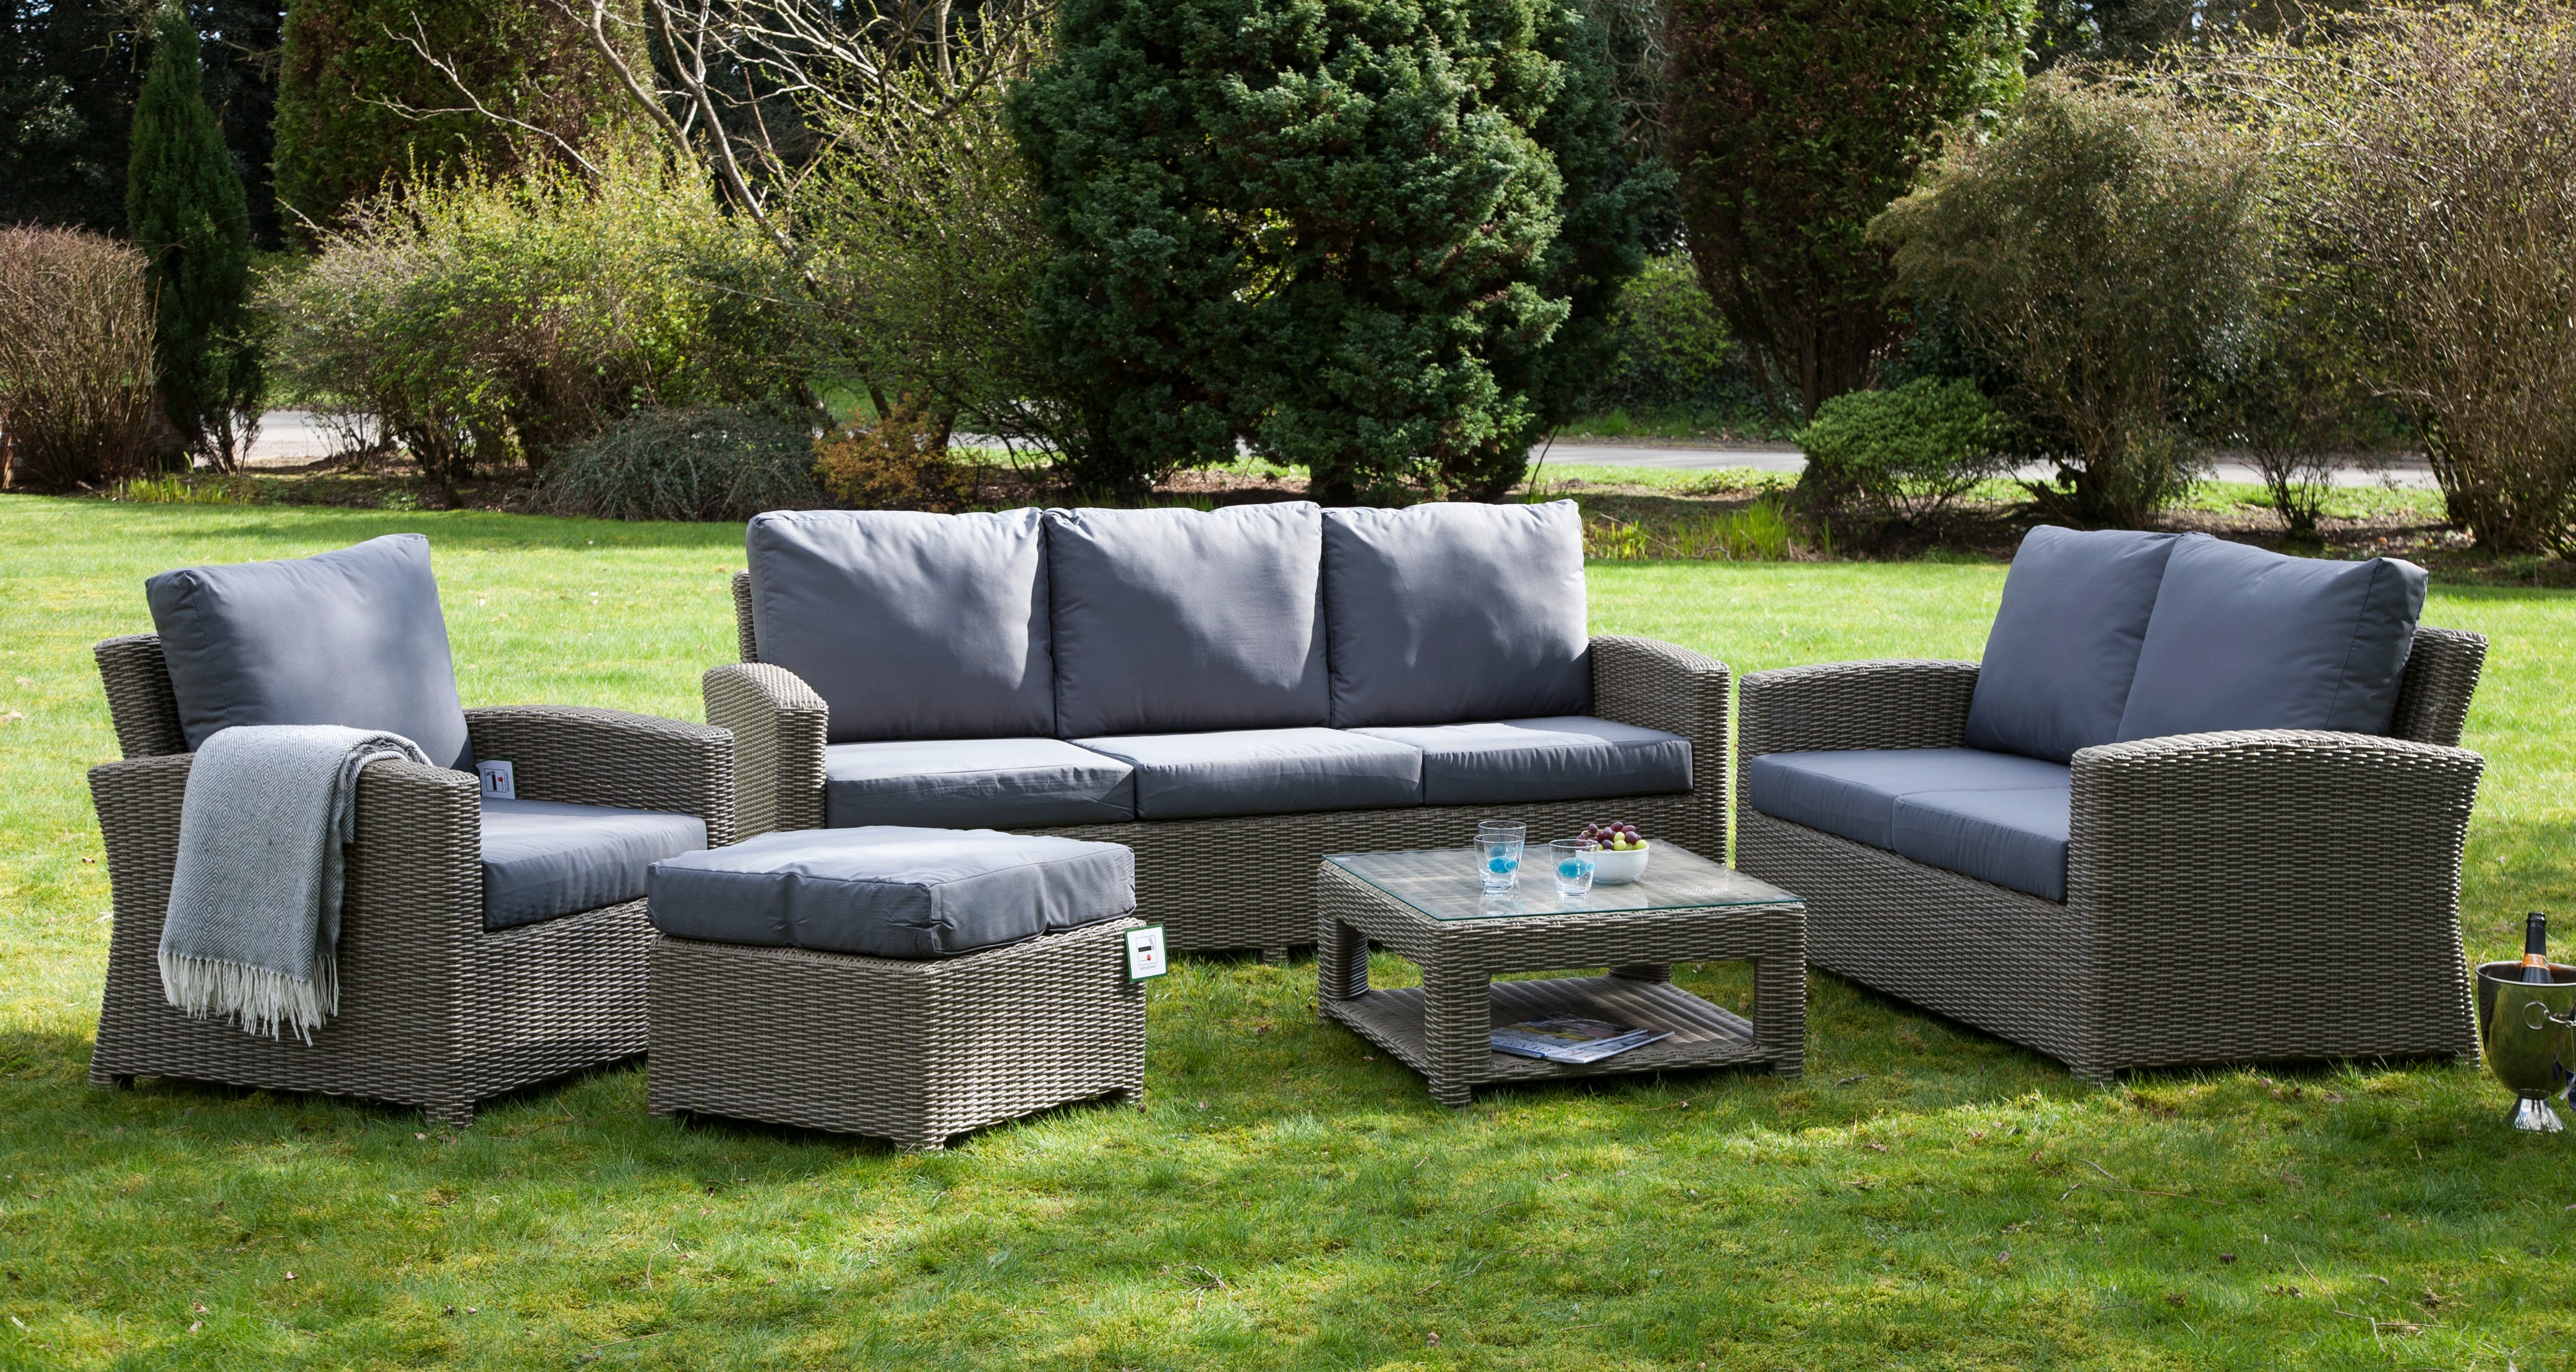 Rattan all weather Garden Furniture for outdoor use or can be used for indoor Conservatory furniture